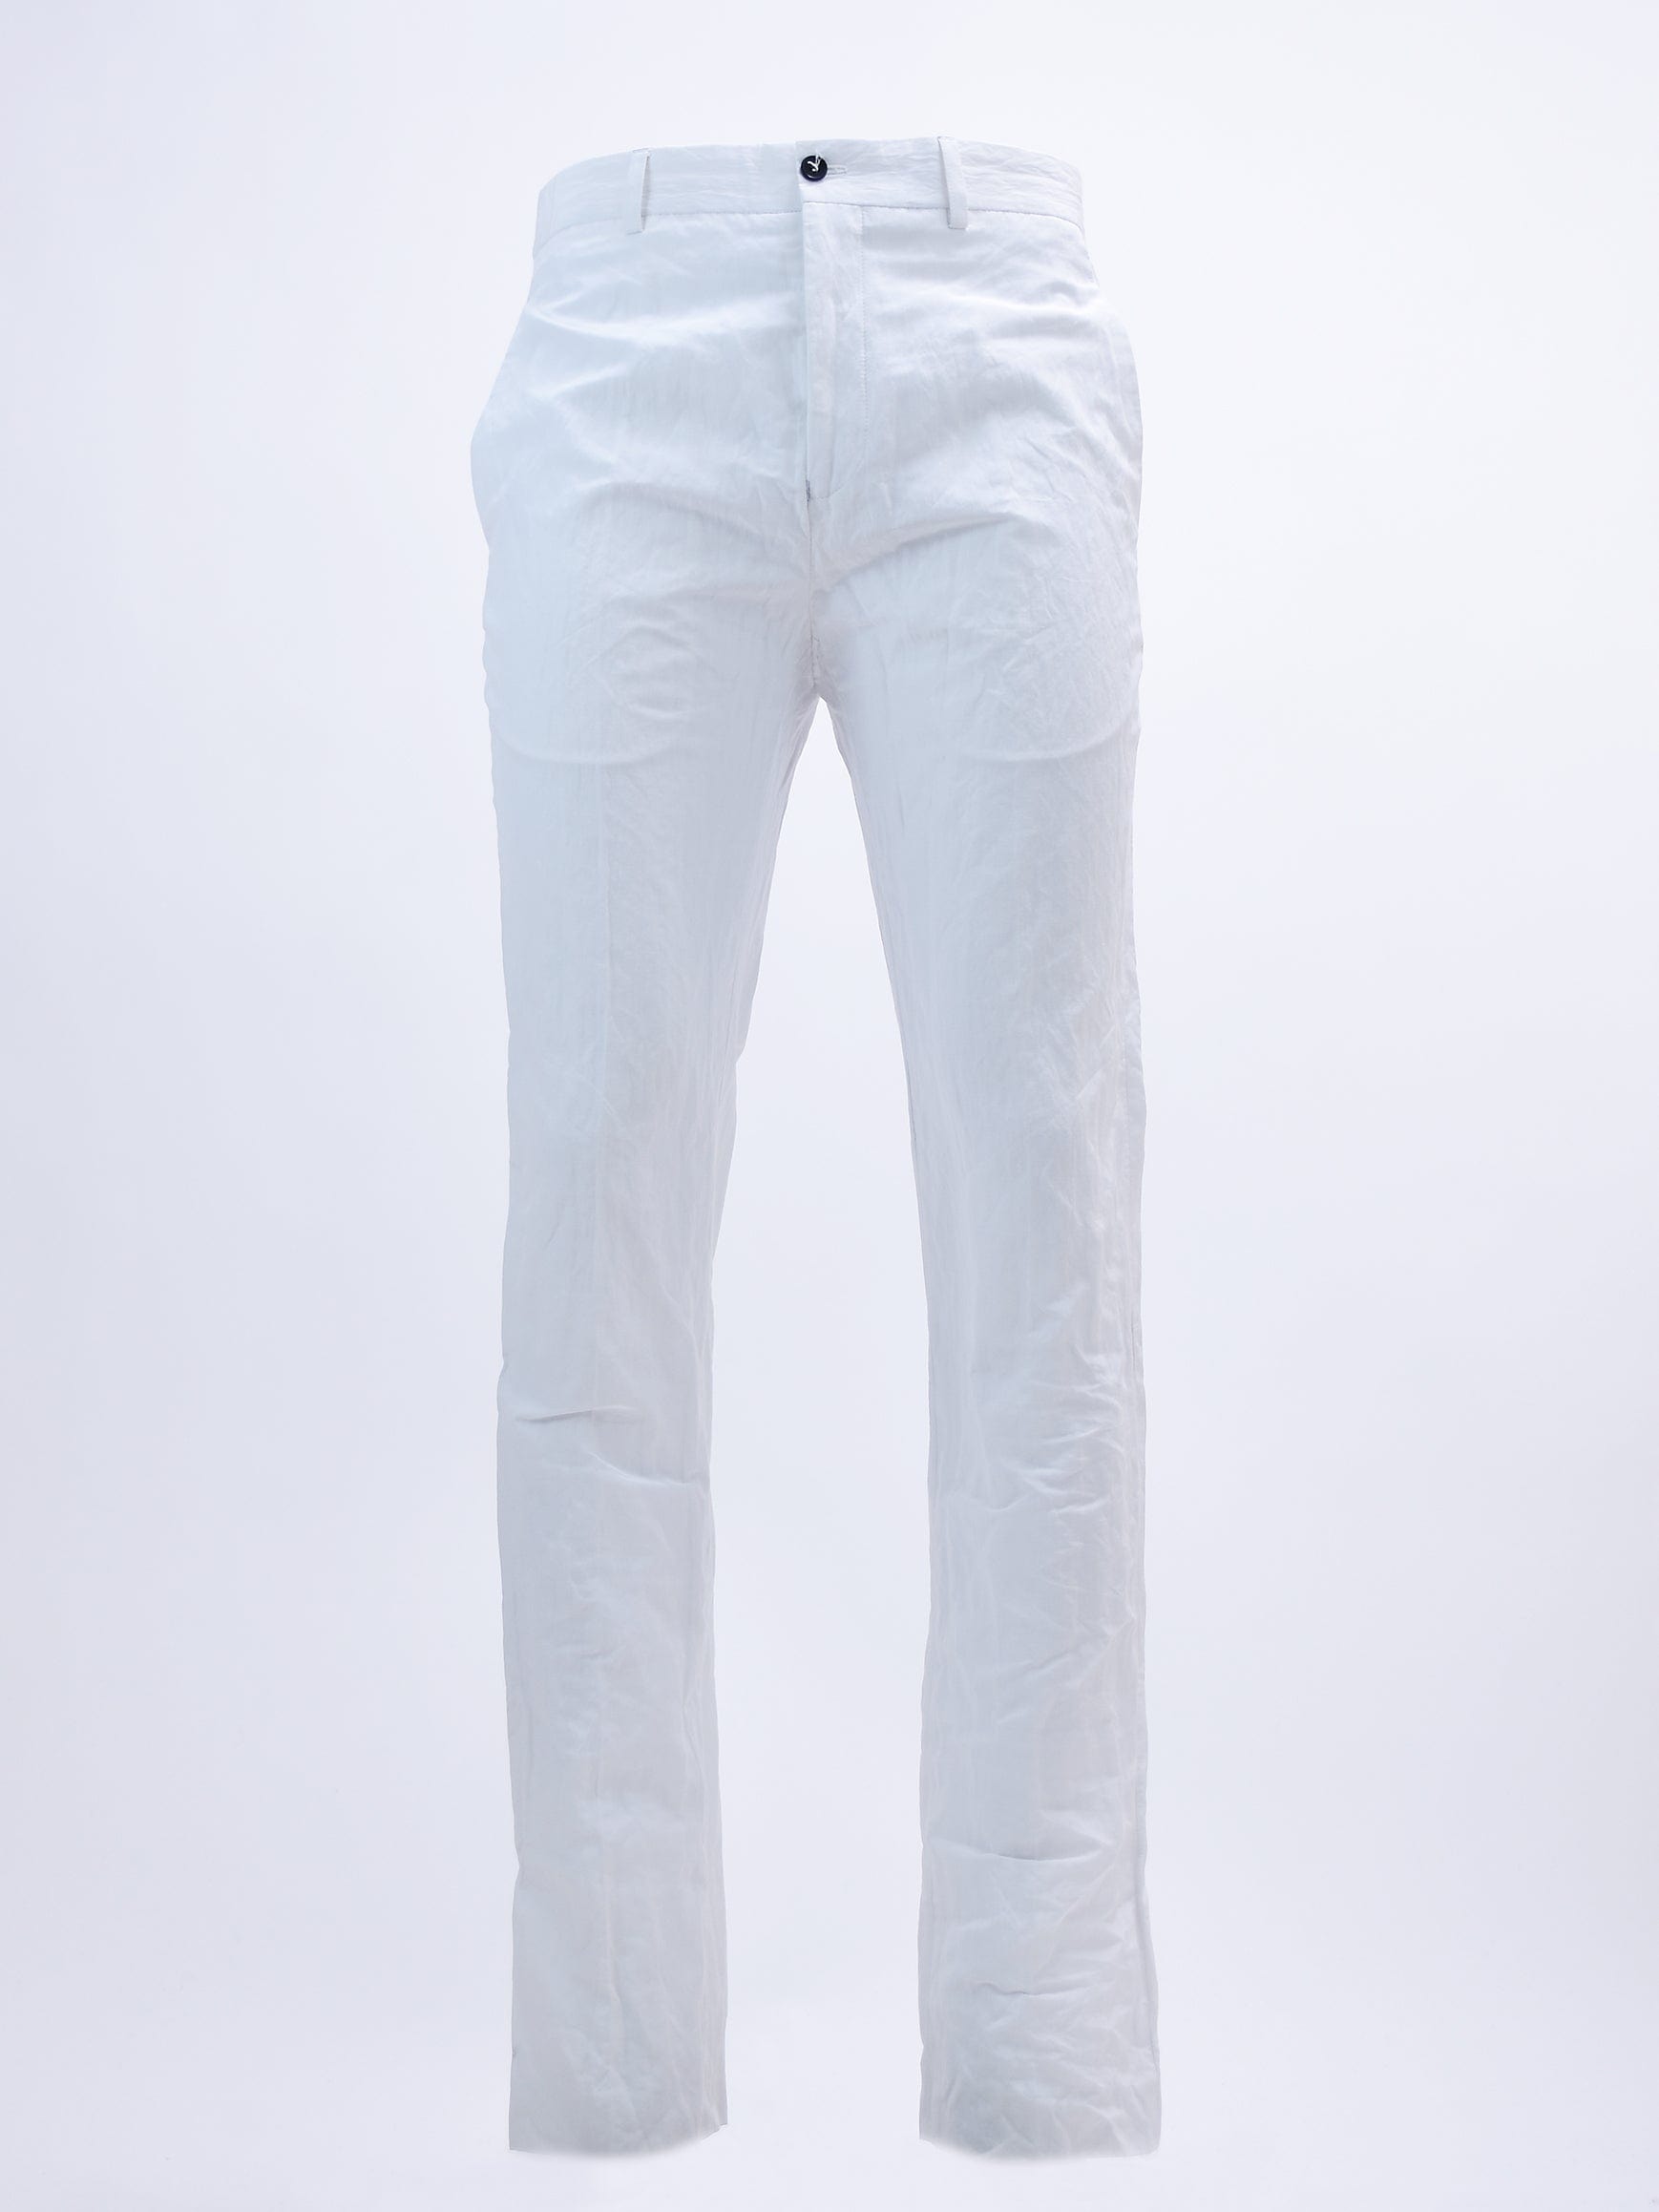 WHITE LIGHT COTTON MIX CRINKLE TAILORED CLASSIC CIGARETTE TROUSERS